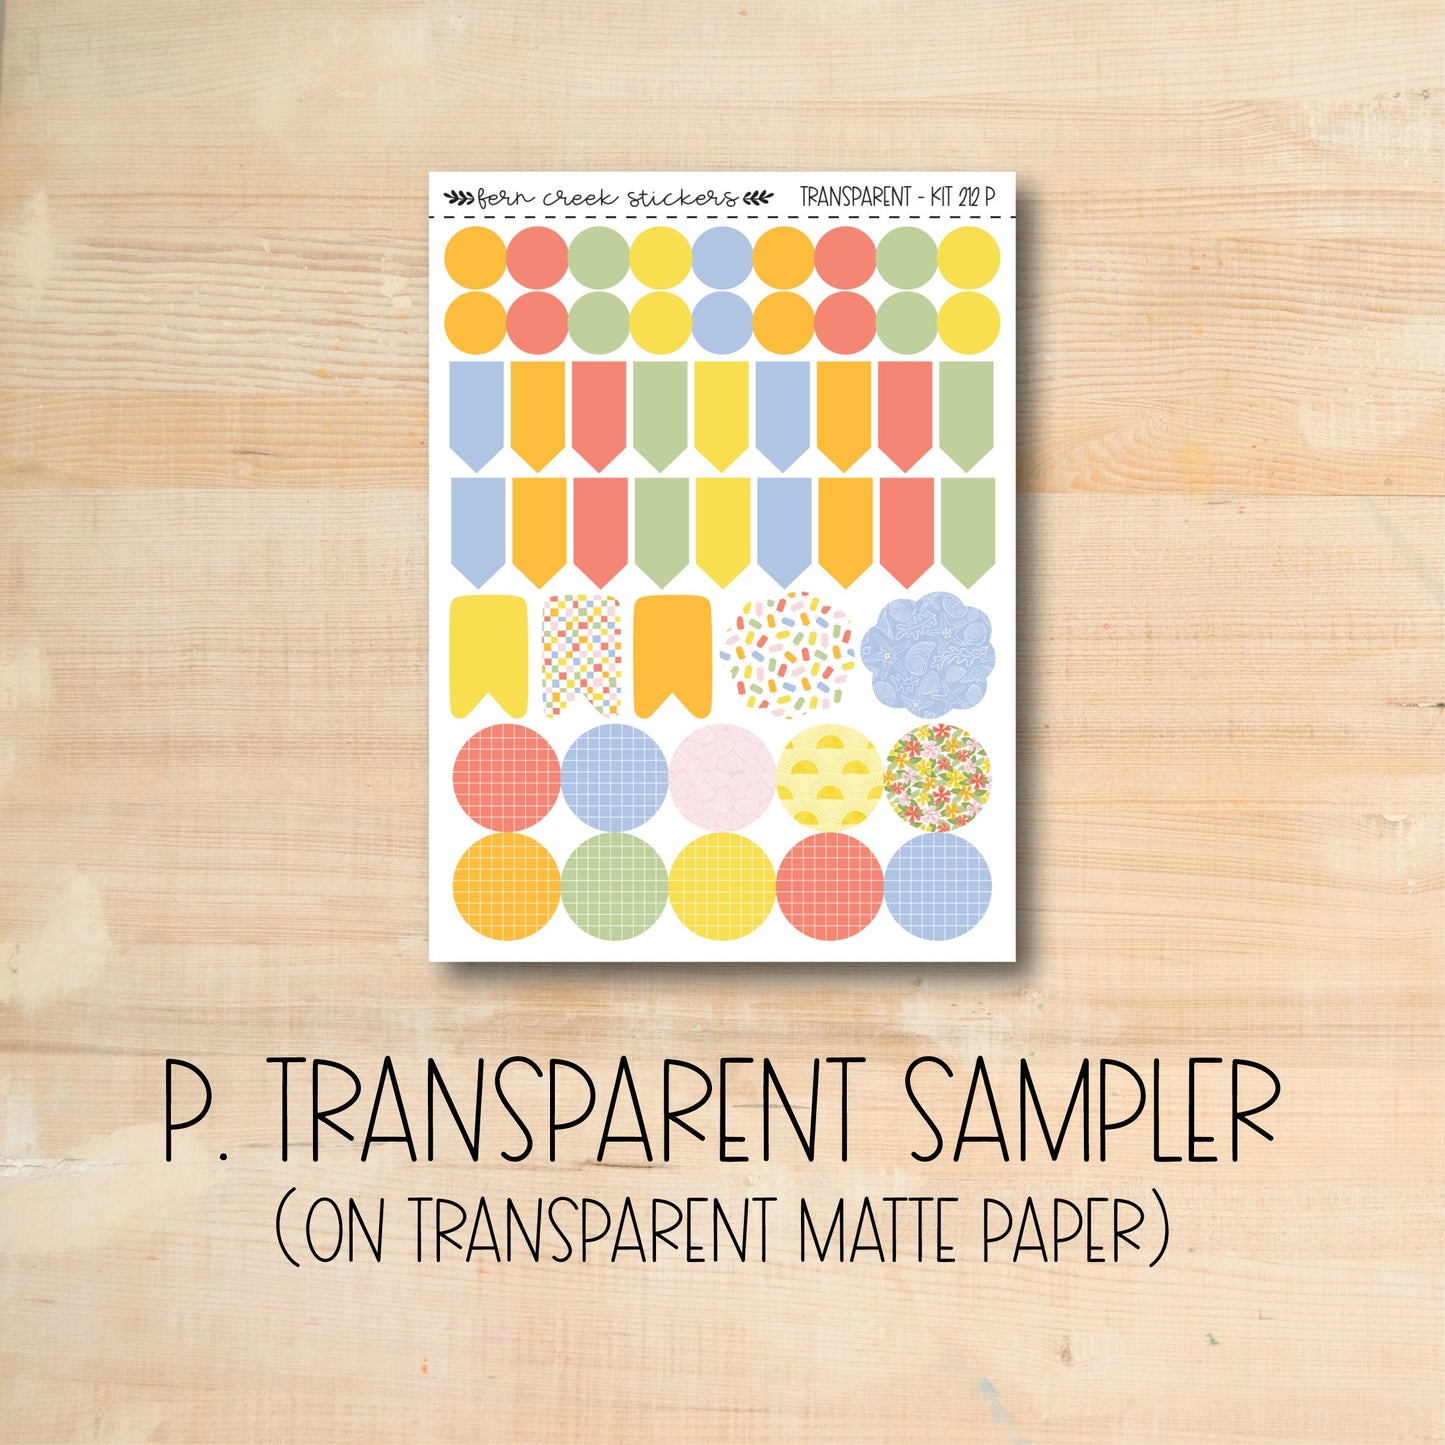 a picture of a wooden surface with the words p transparent transparent sampler on it